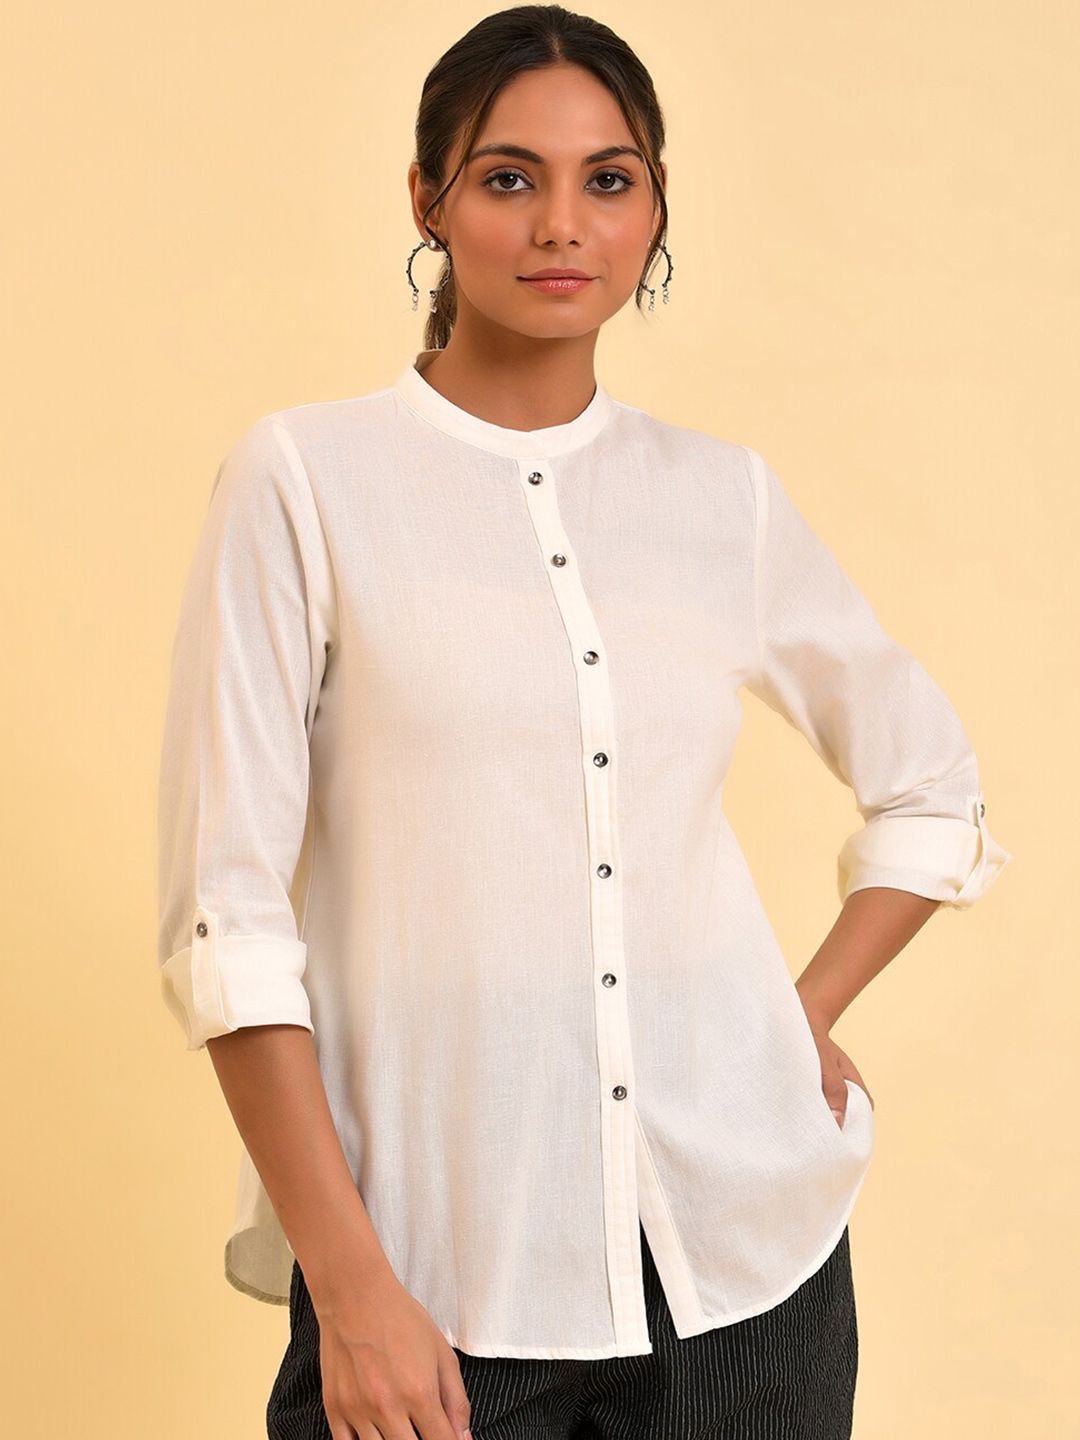 W White Mandarin Collar Roll-Up Sleeves Cotton Shirt Style Top Price in India